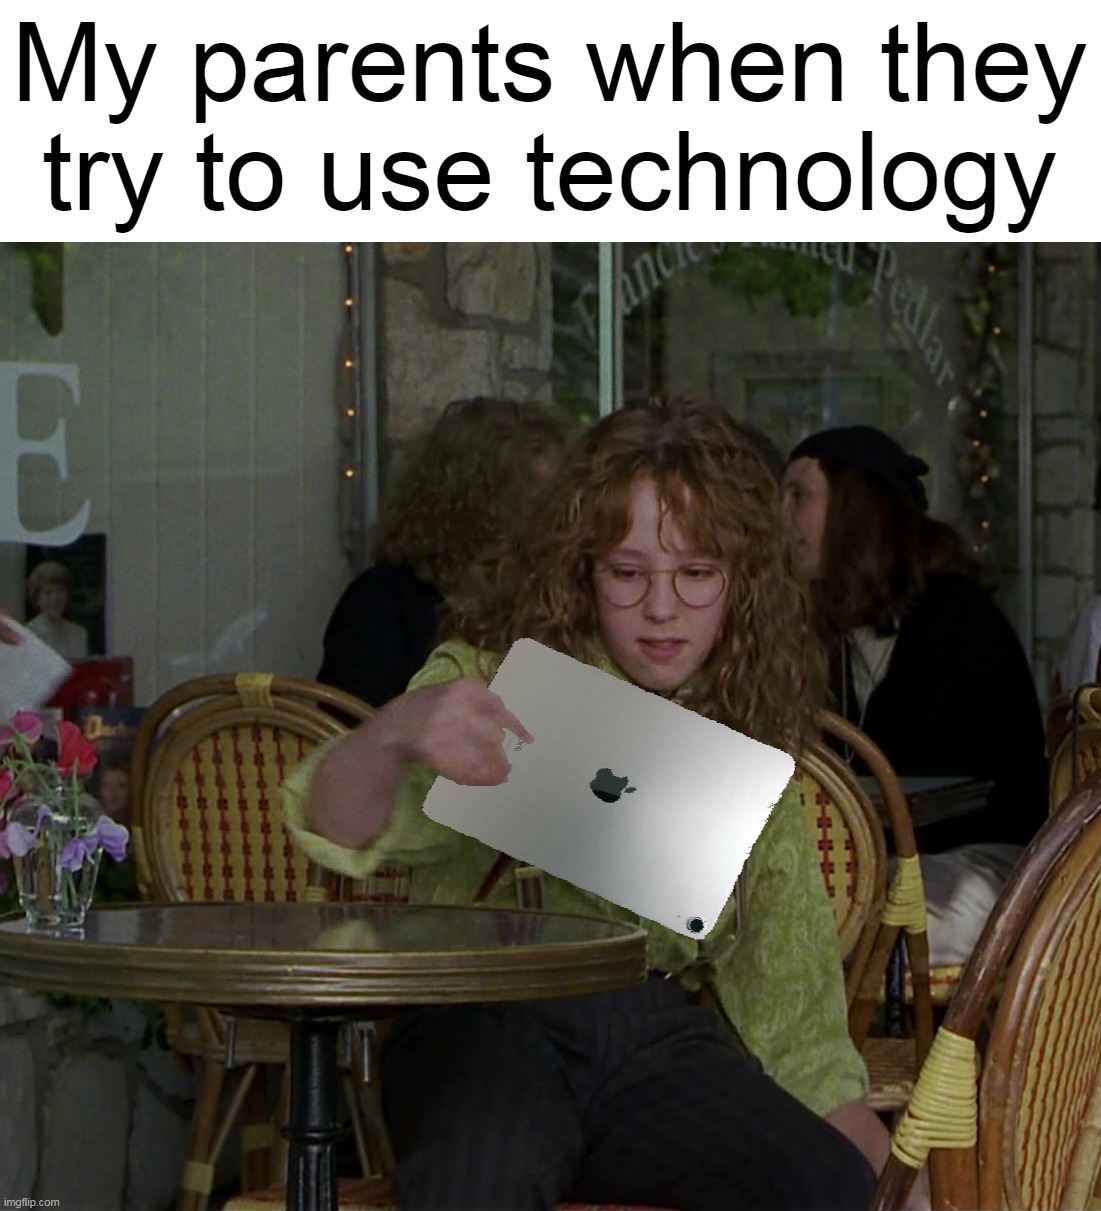 Explaining at Least a Hundred Times, Ugh | My parents when they try to use technology | image tagged in mallory looking at notebook,meme,memes,humor,parents,technology | made w/ Imgflip meme maker